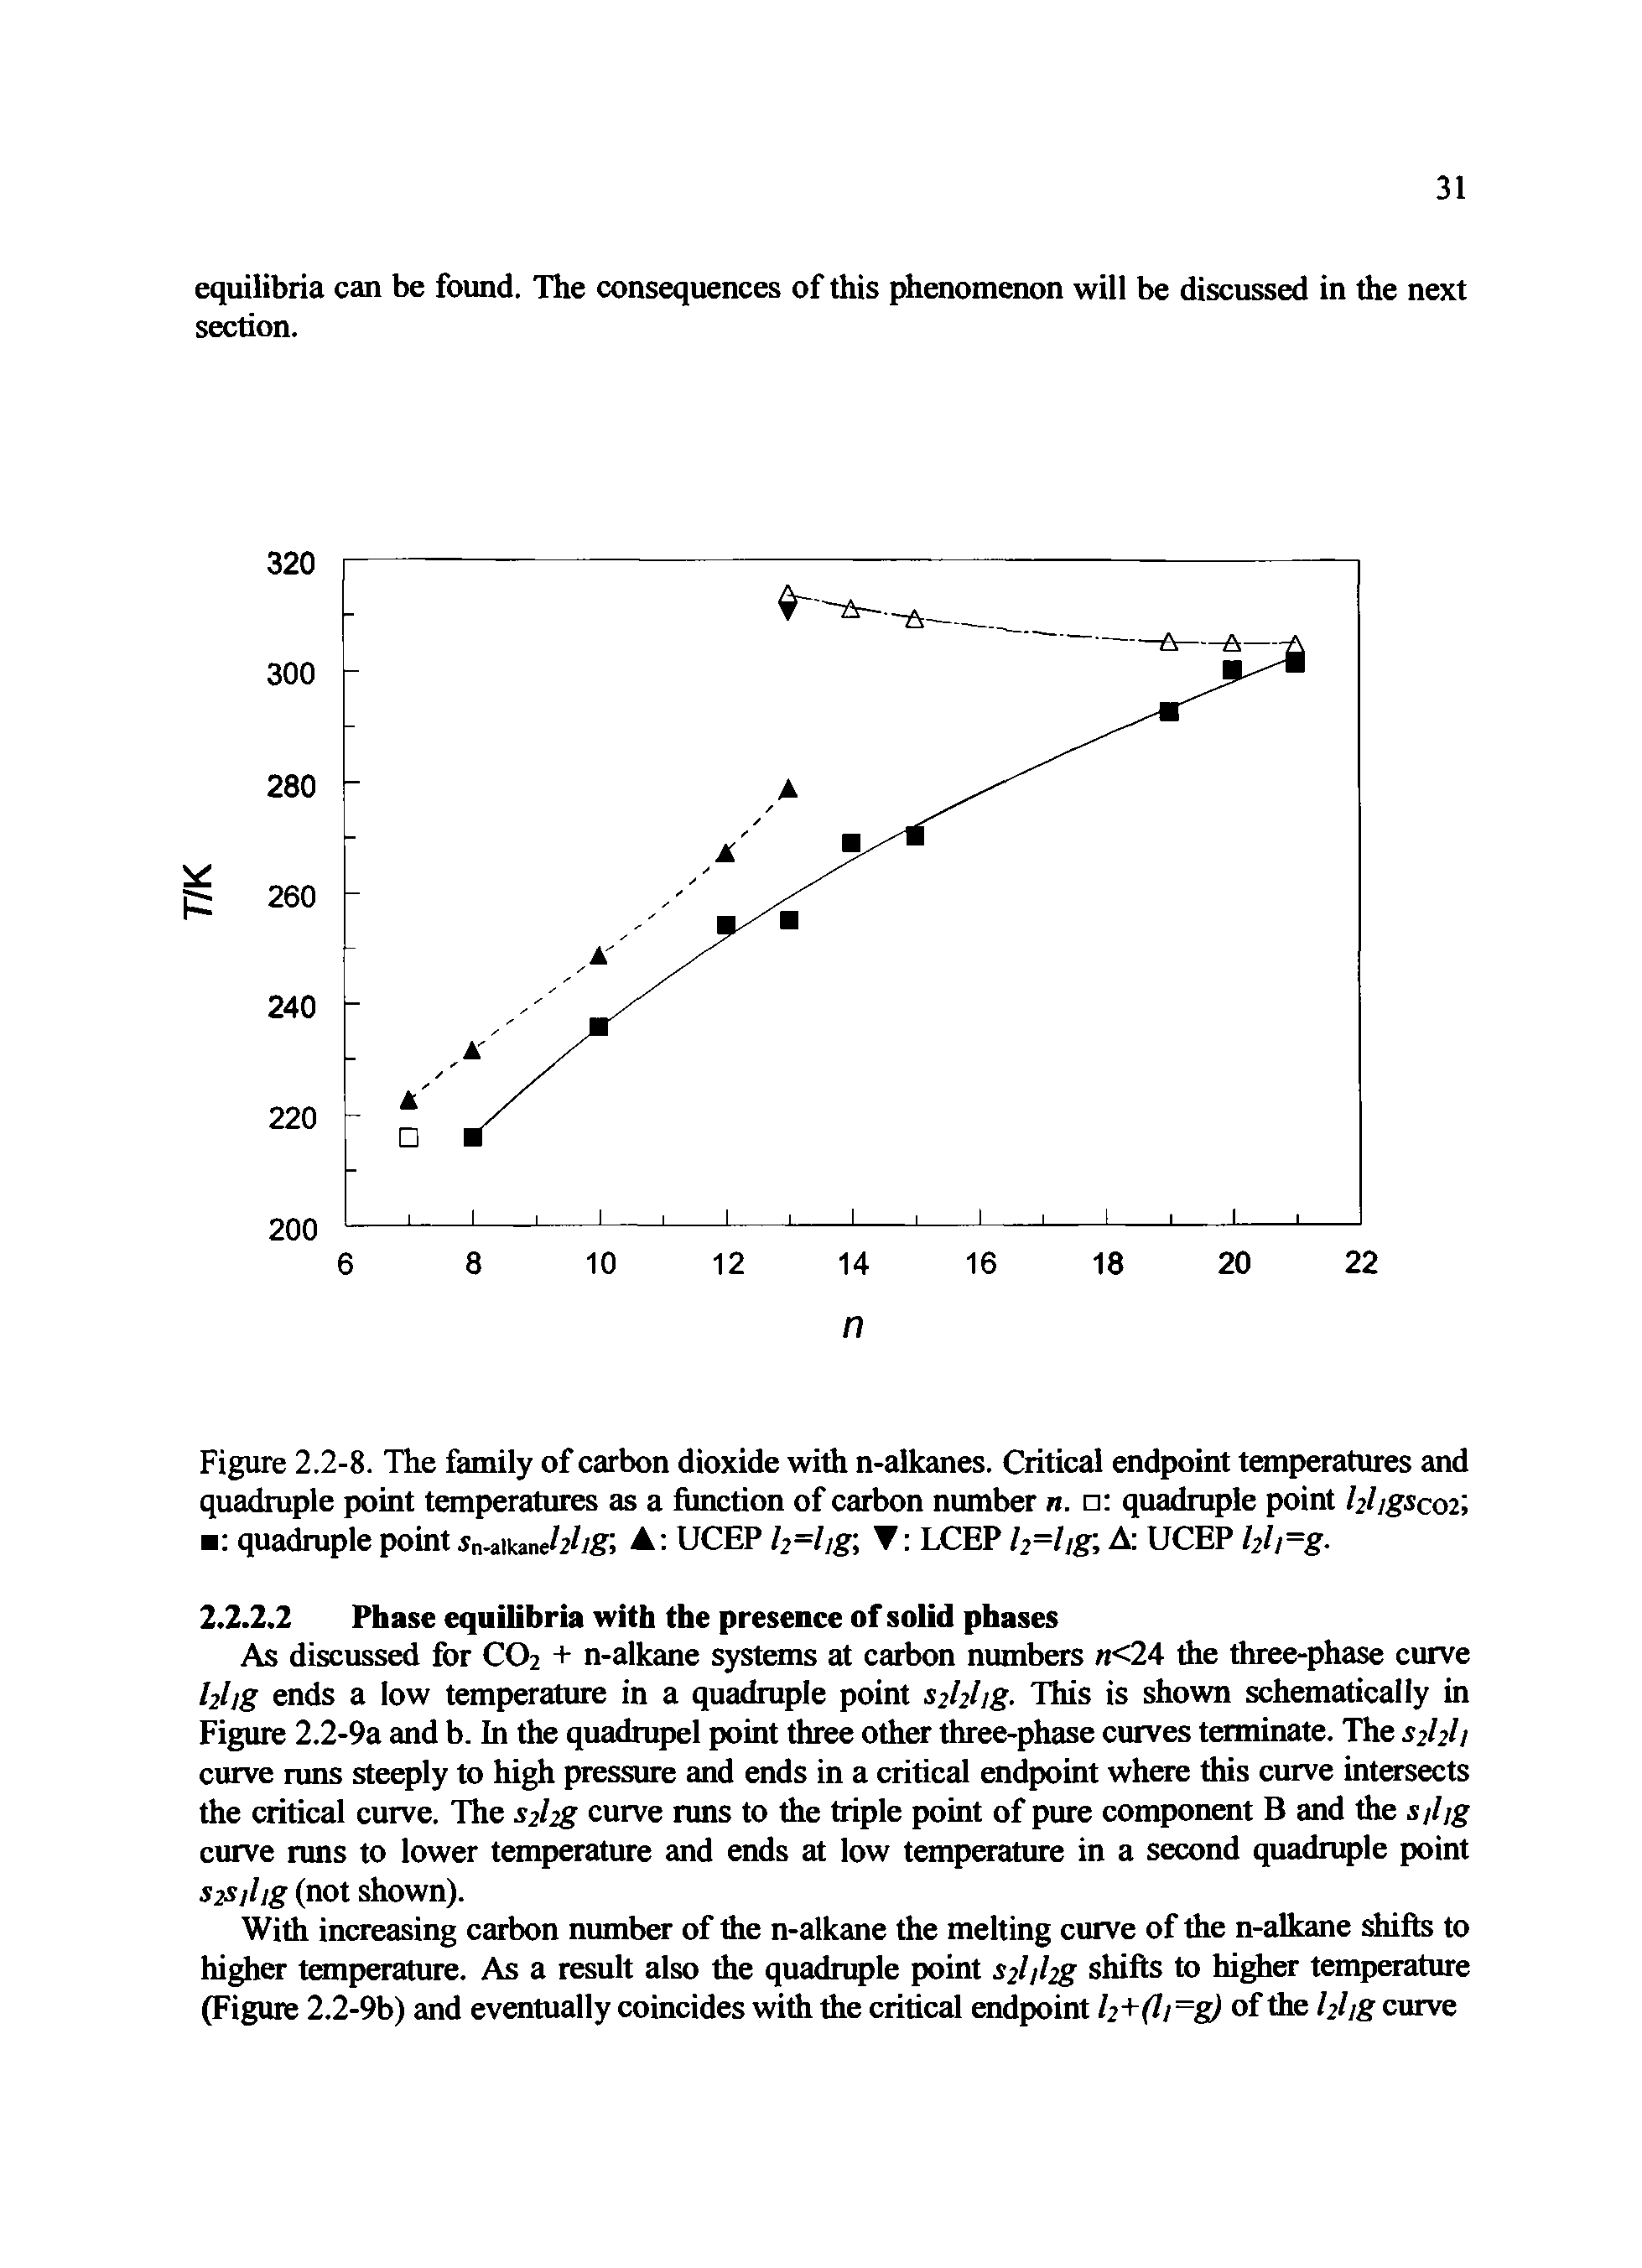 Figure 2.2-8. The family of carbon dioxide with n-alkanes. Critical endpoint temperatures and quadruple point temperatures as a function of carbon number n. quadruple point hhgscoi, quadruple point 5n-aikaneW/g A UCEP l2=lig LCEP /2=//g A UCEP hh=g-...